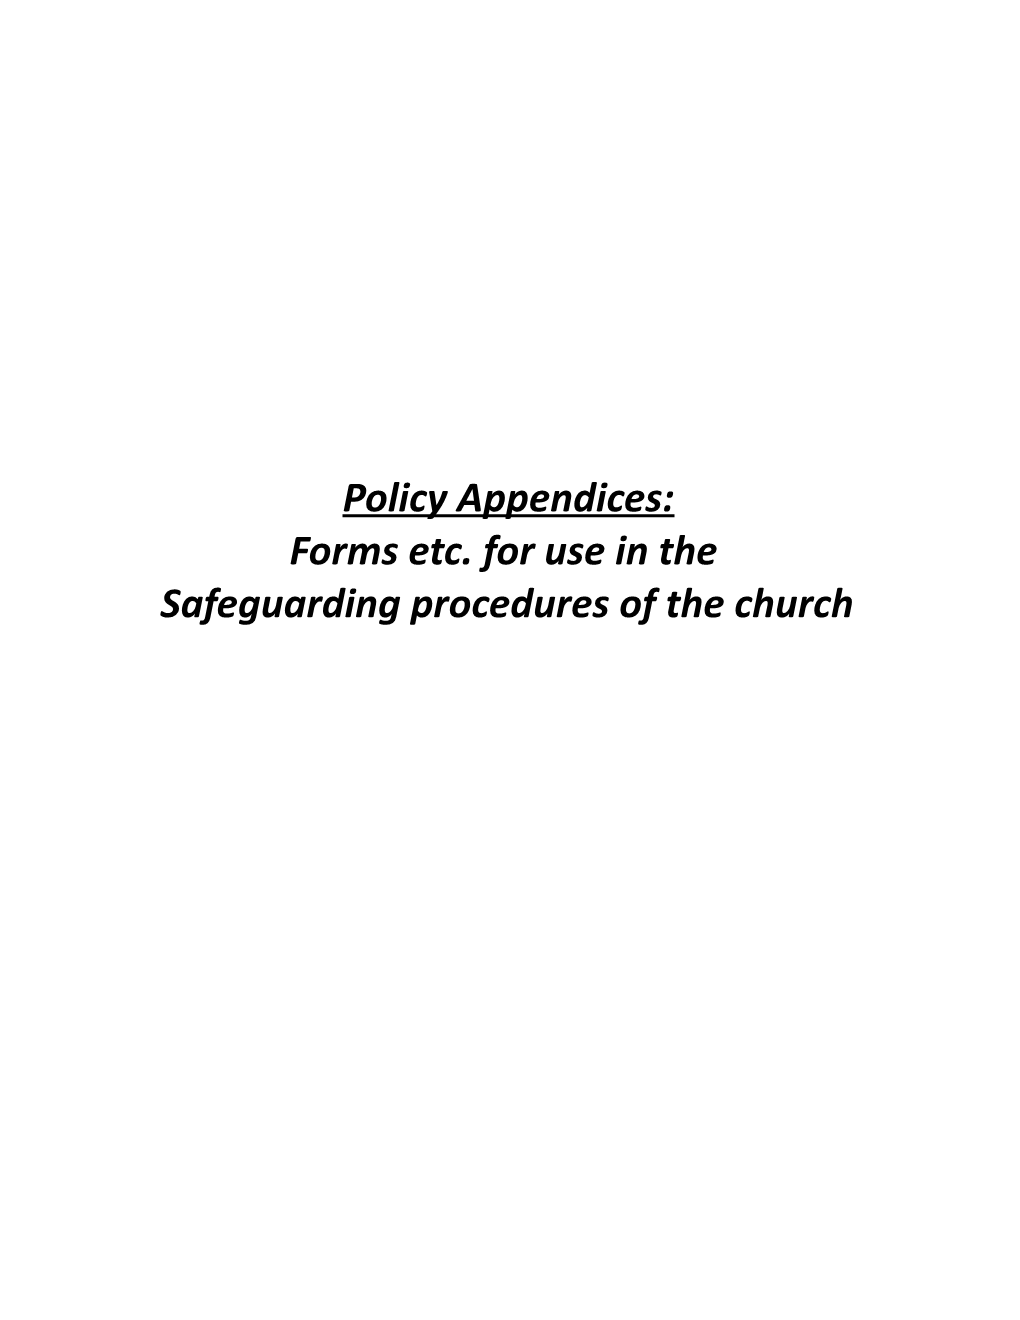 Forms Etc. for Use in the Safeguarding Procedures of the Church